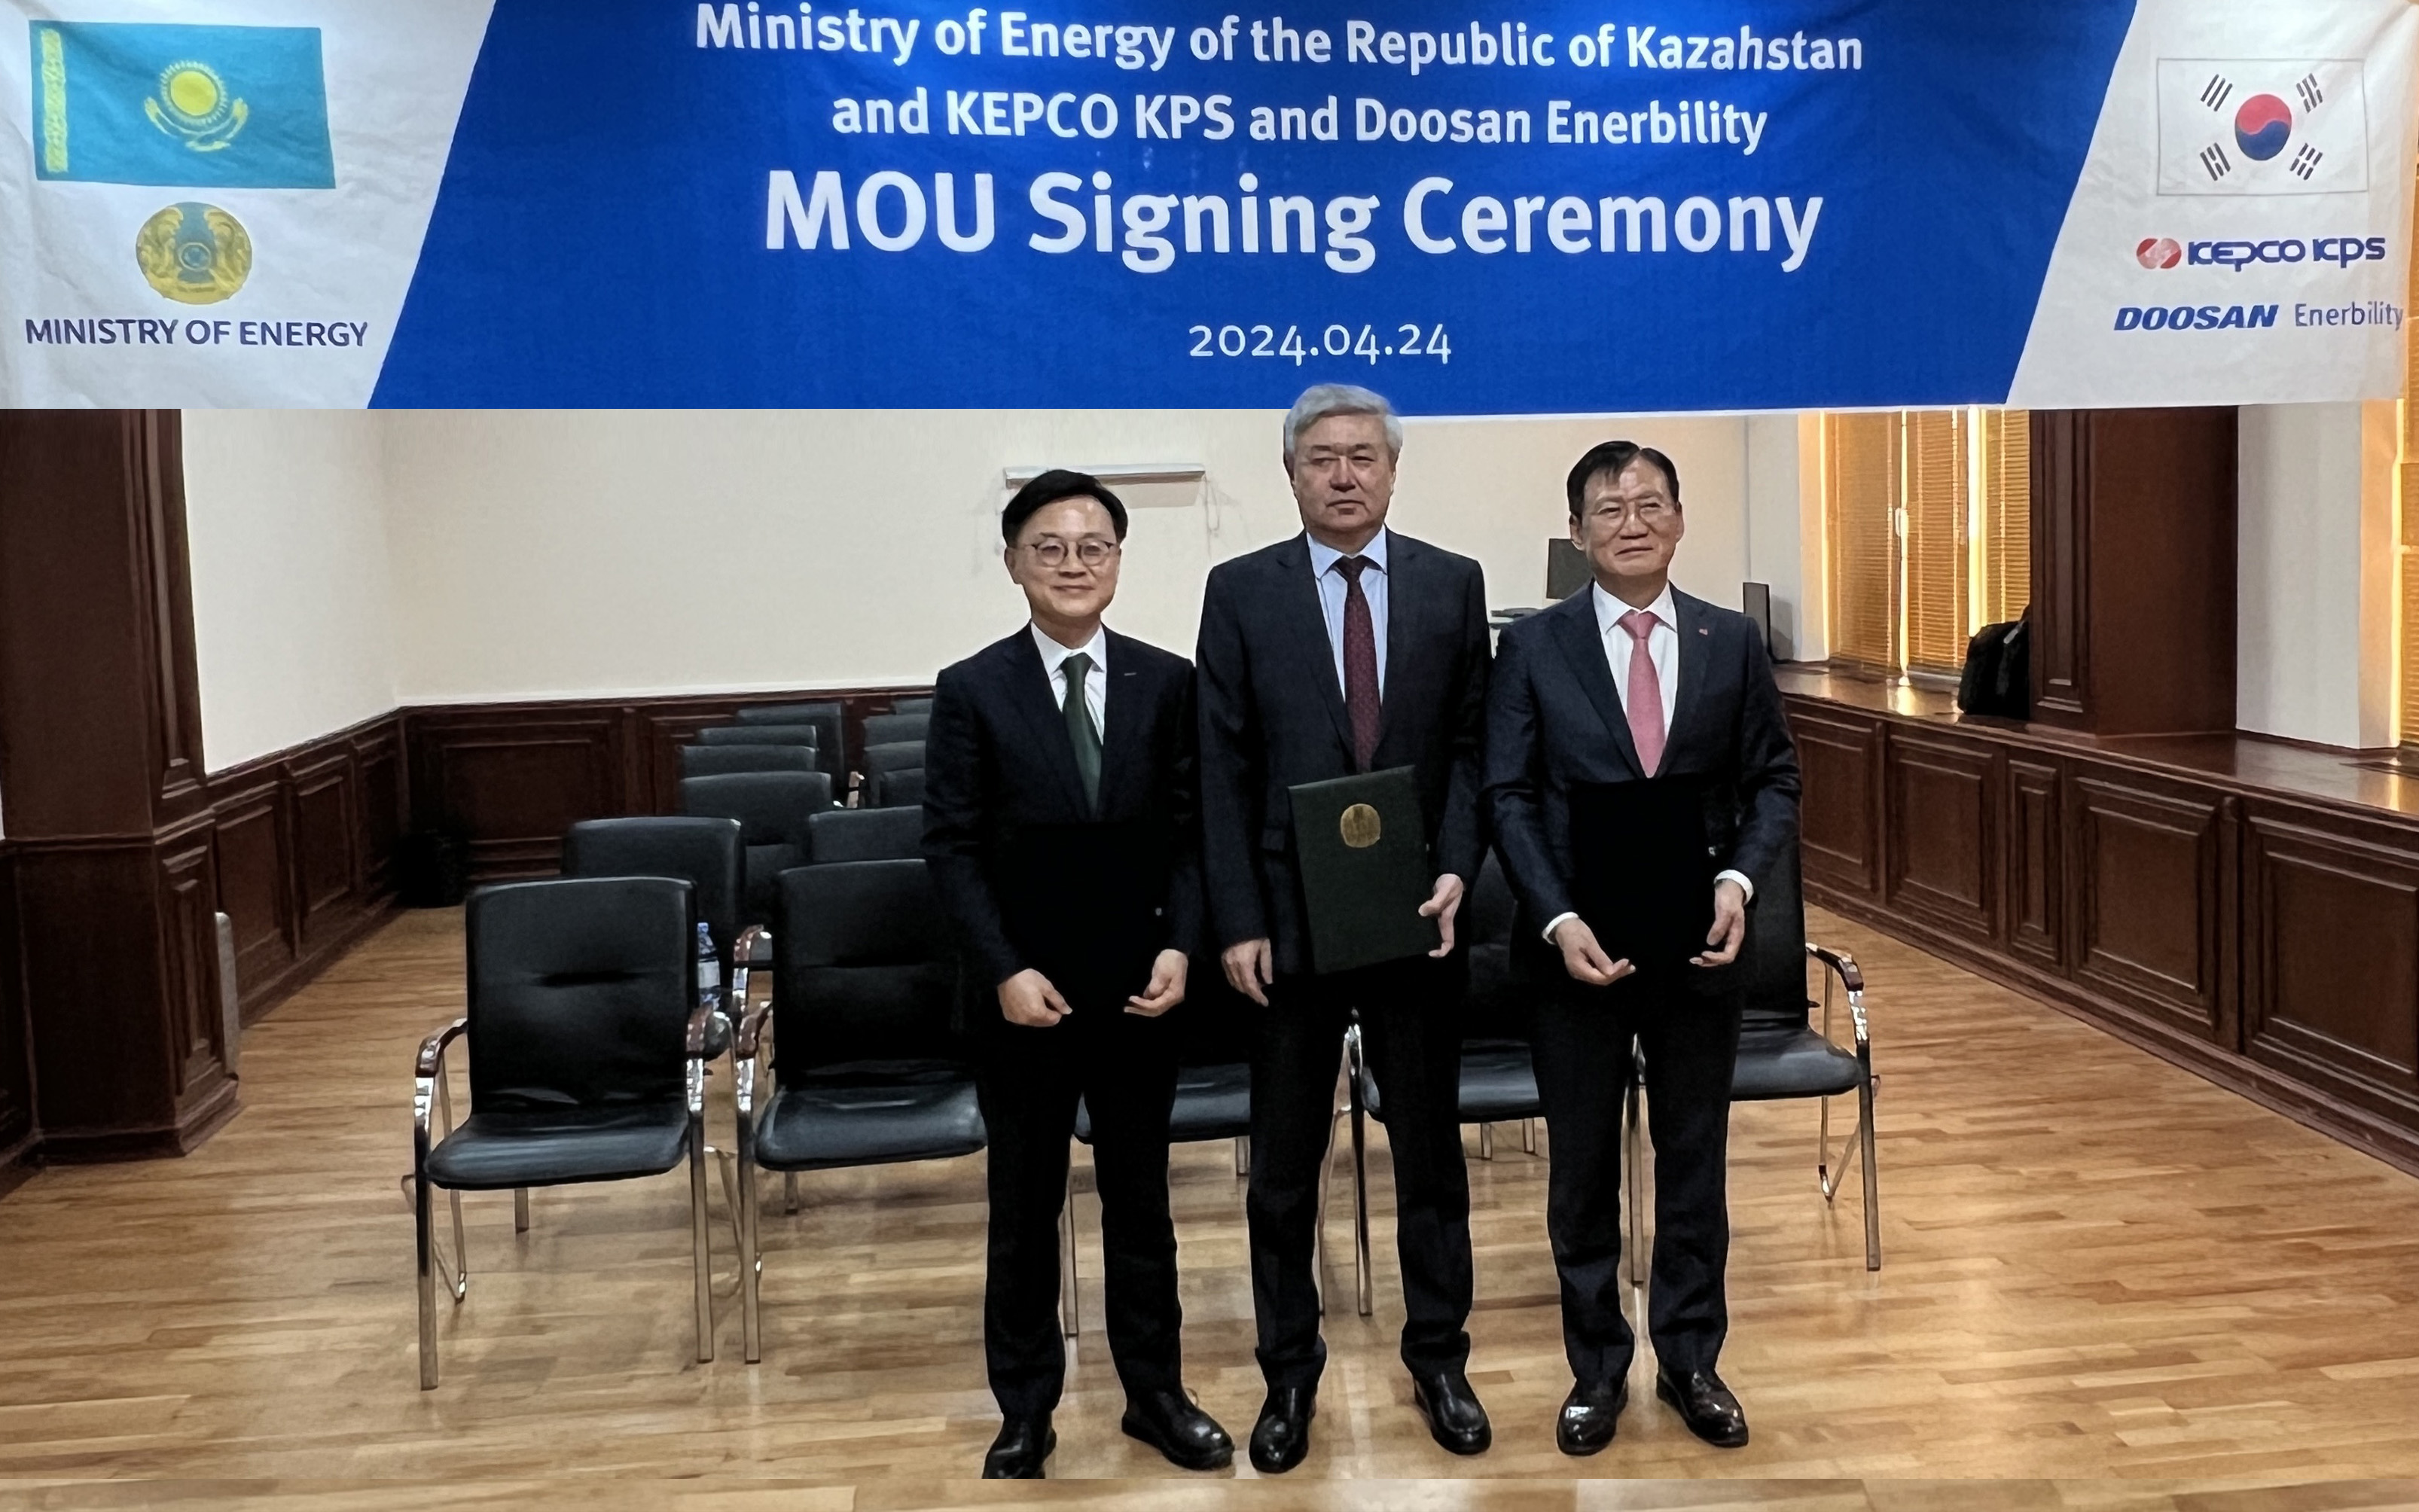 The attendees pose for a group photo at the “MOU on Outdated Power Plant Modernization” signing ceremony that was held in Kazakhstan’s capital, Astana. (From right to left) Hongyoun Kim, CEO of KEPCO KPS; Sungat Yessimkhanov, Kazakhstan’s Vice Minister of Energy; Jungkwan Kim, CMO of Doosan Enerbility.